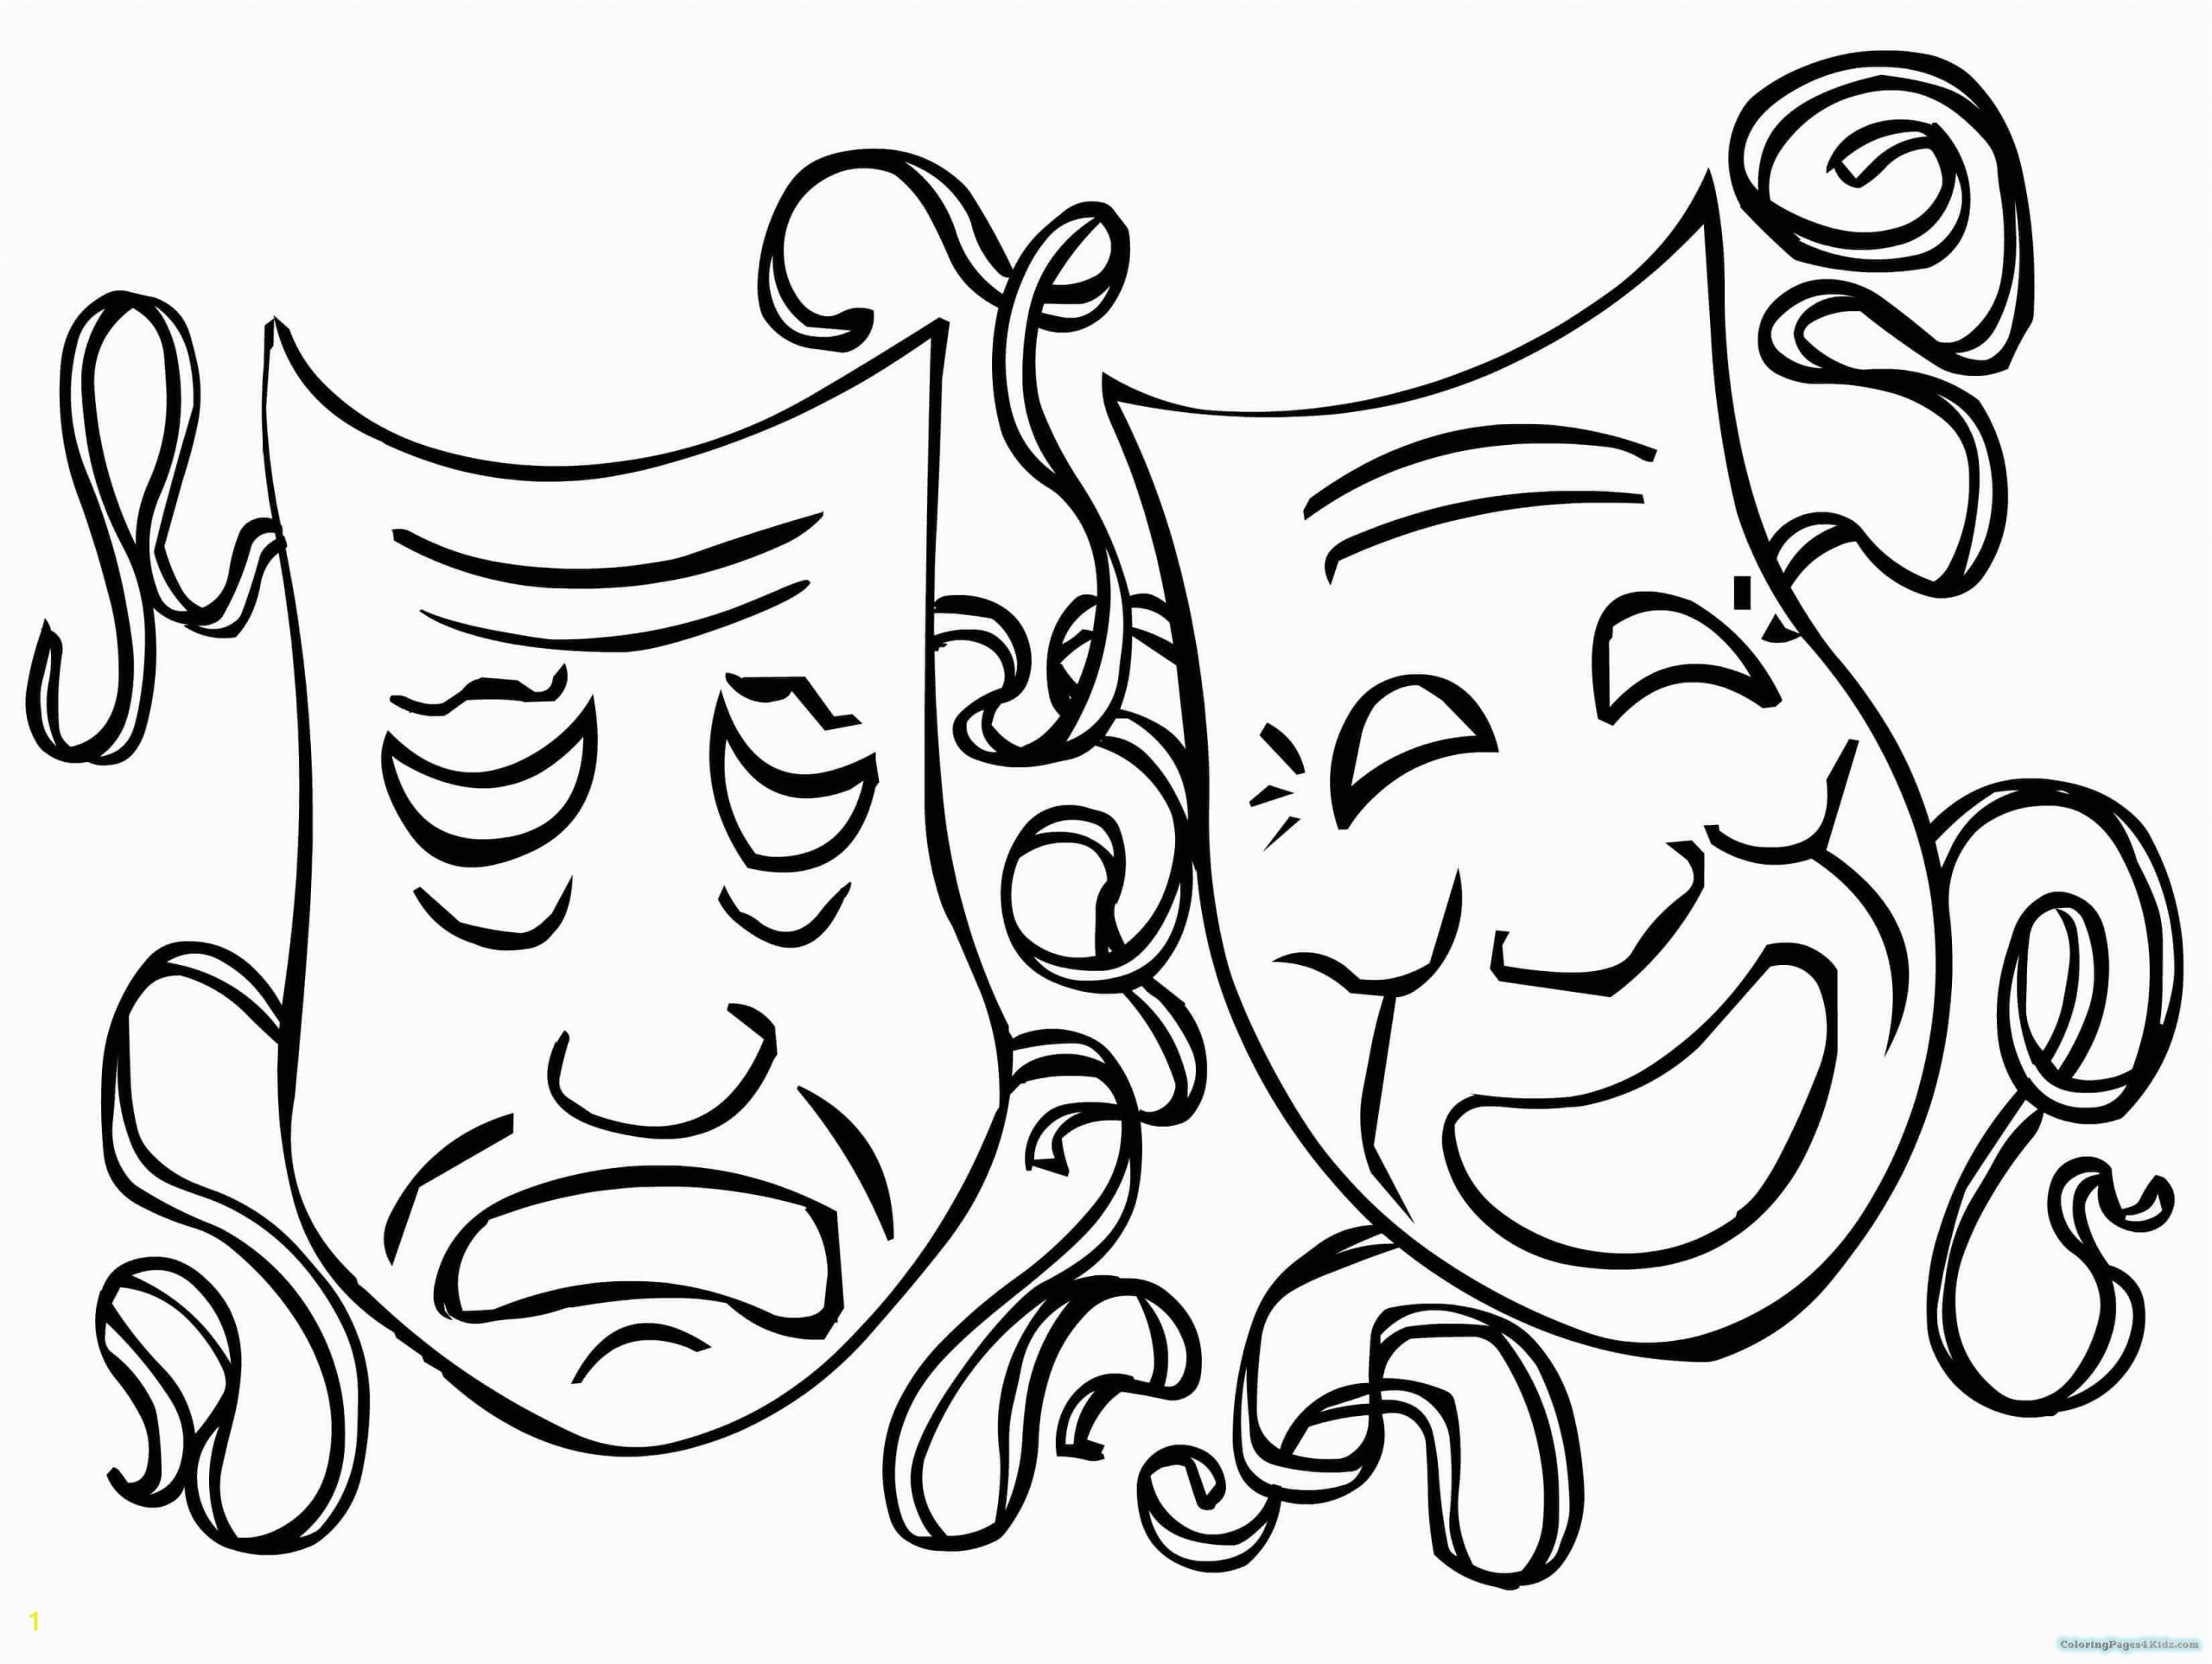 Coloring Pages Of Mardi Gras Masks Mardi Gras Mask Coloring Pages for Kids